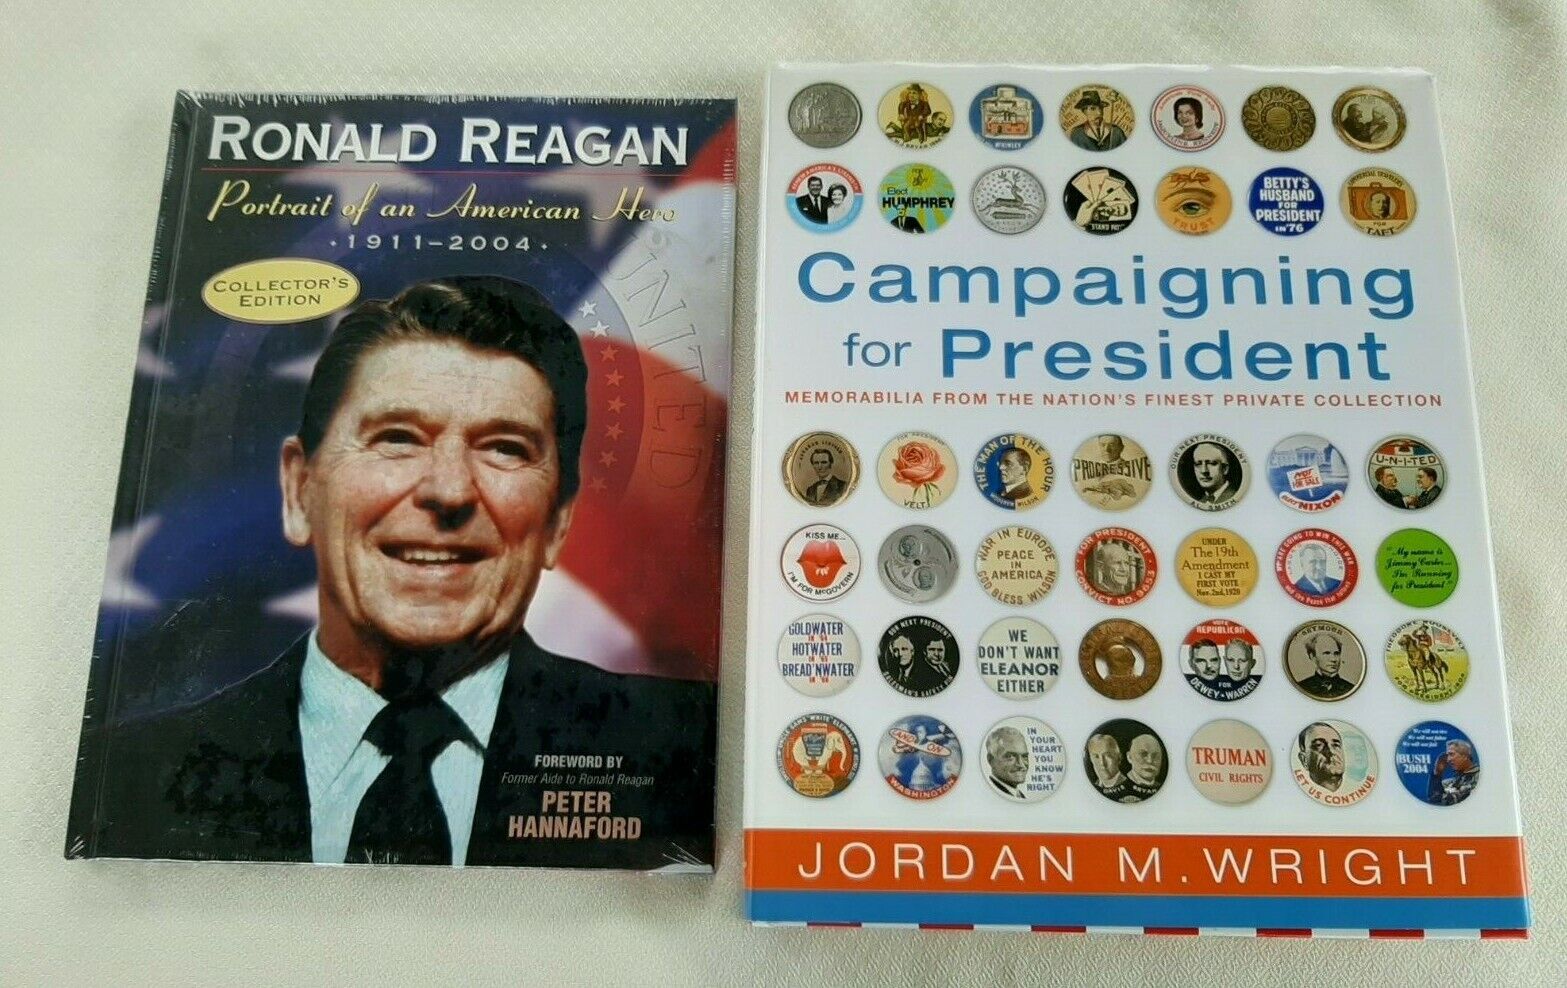 CAMPAIGNING FOR PRESIDENT HARDCOVER BOOK & RONALD REAGAN AMERICAN HERO BOOK Без бренда